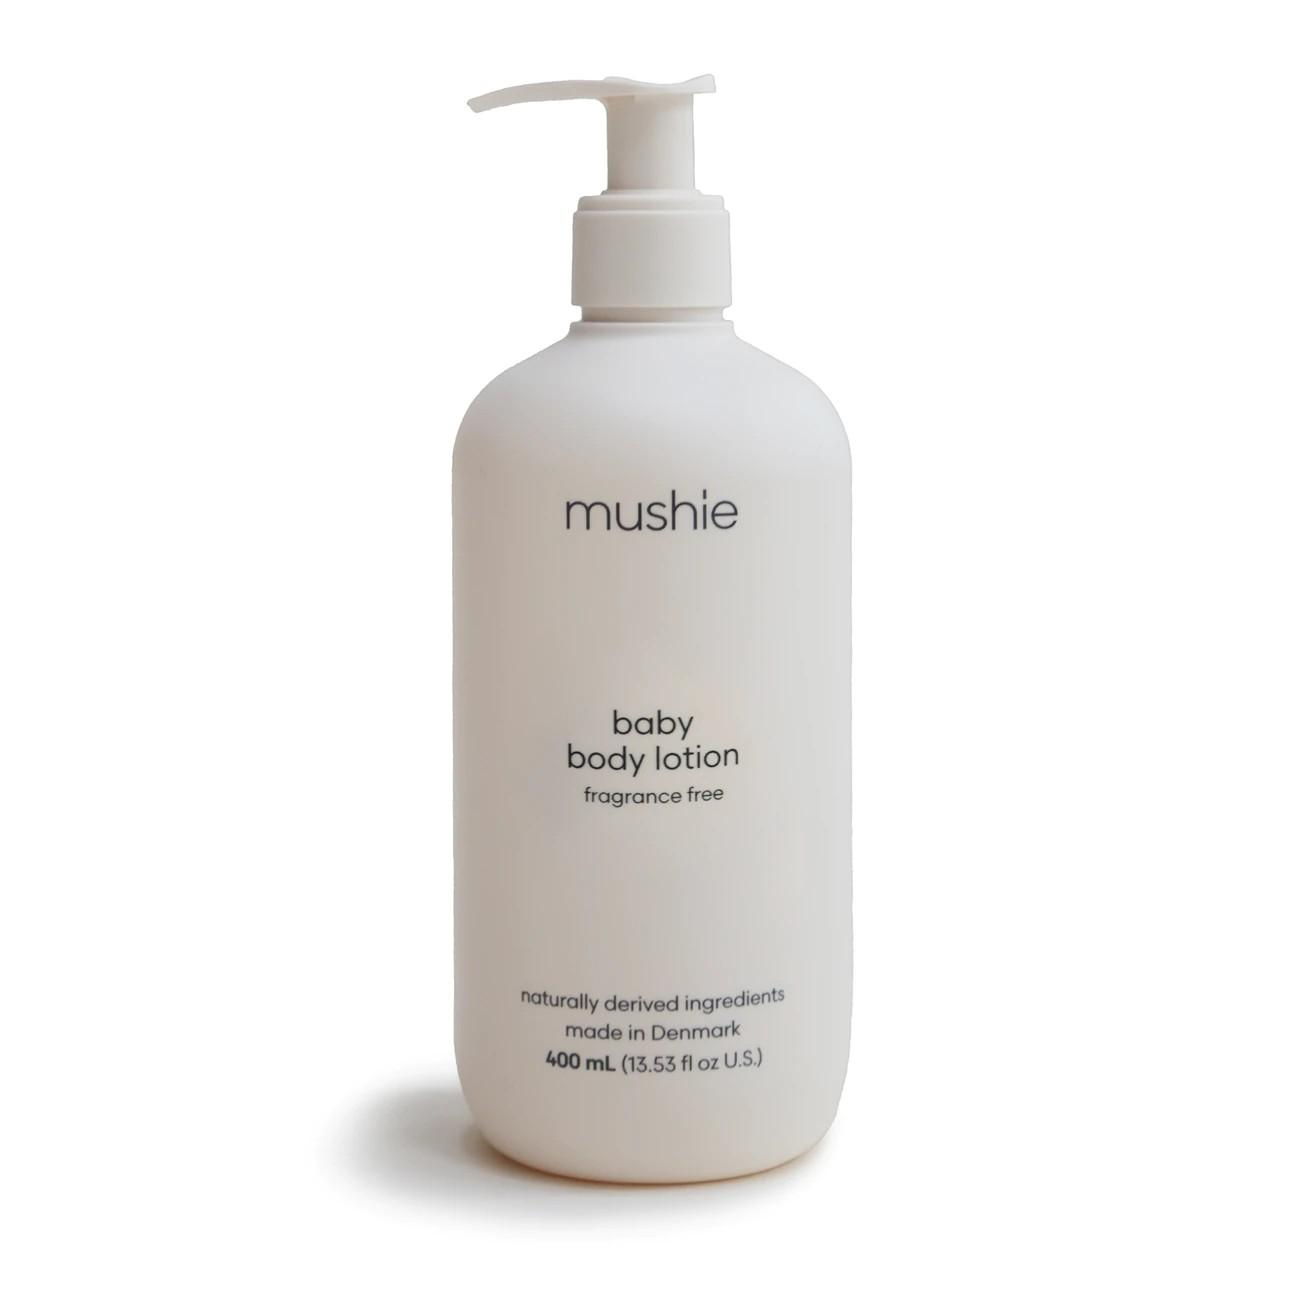 Mushie - Baby lotion fragrance free (cosmos) 400ml